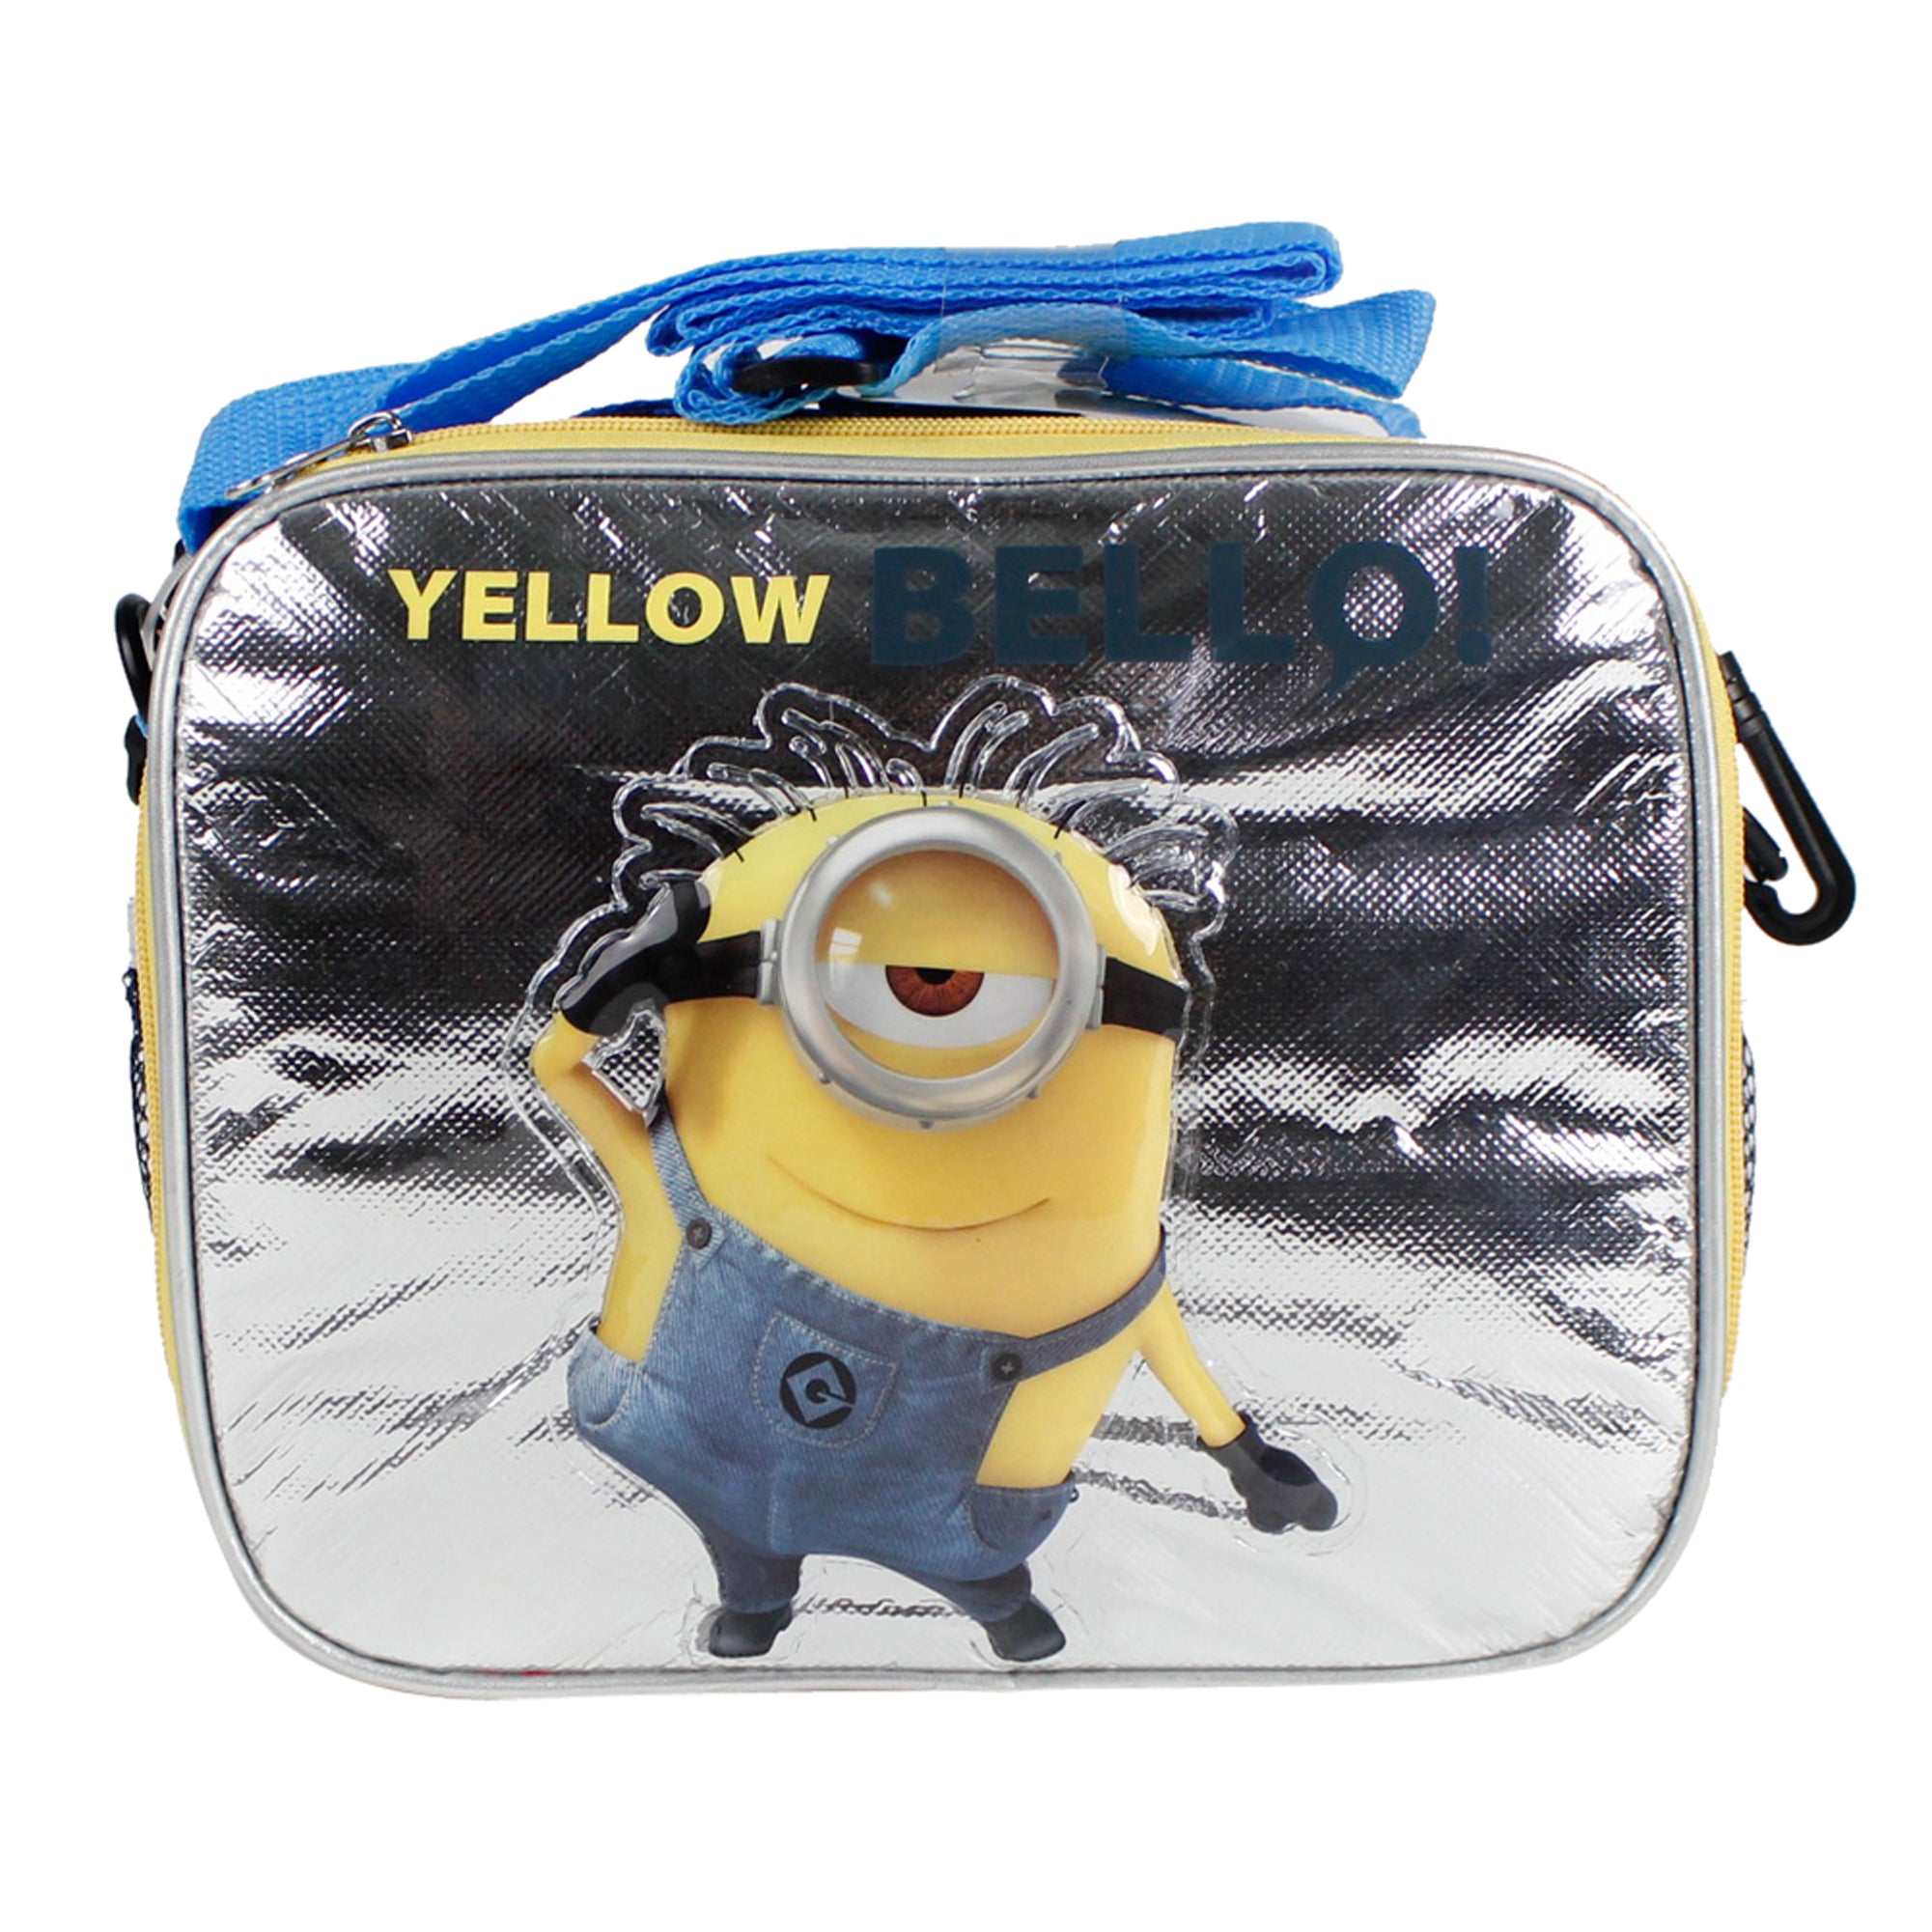 Despicable Me 2 Minion Lunch Bag Insulated Box - Yellow/black,   price tracker / tracking,  price history charts,  price  watches,  price drop alerts